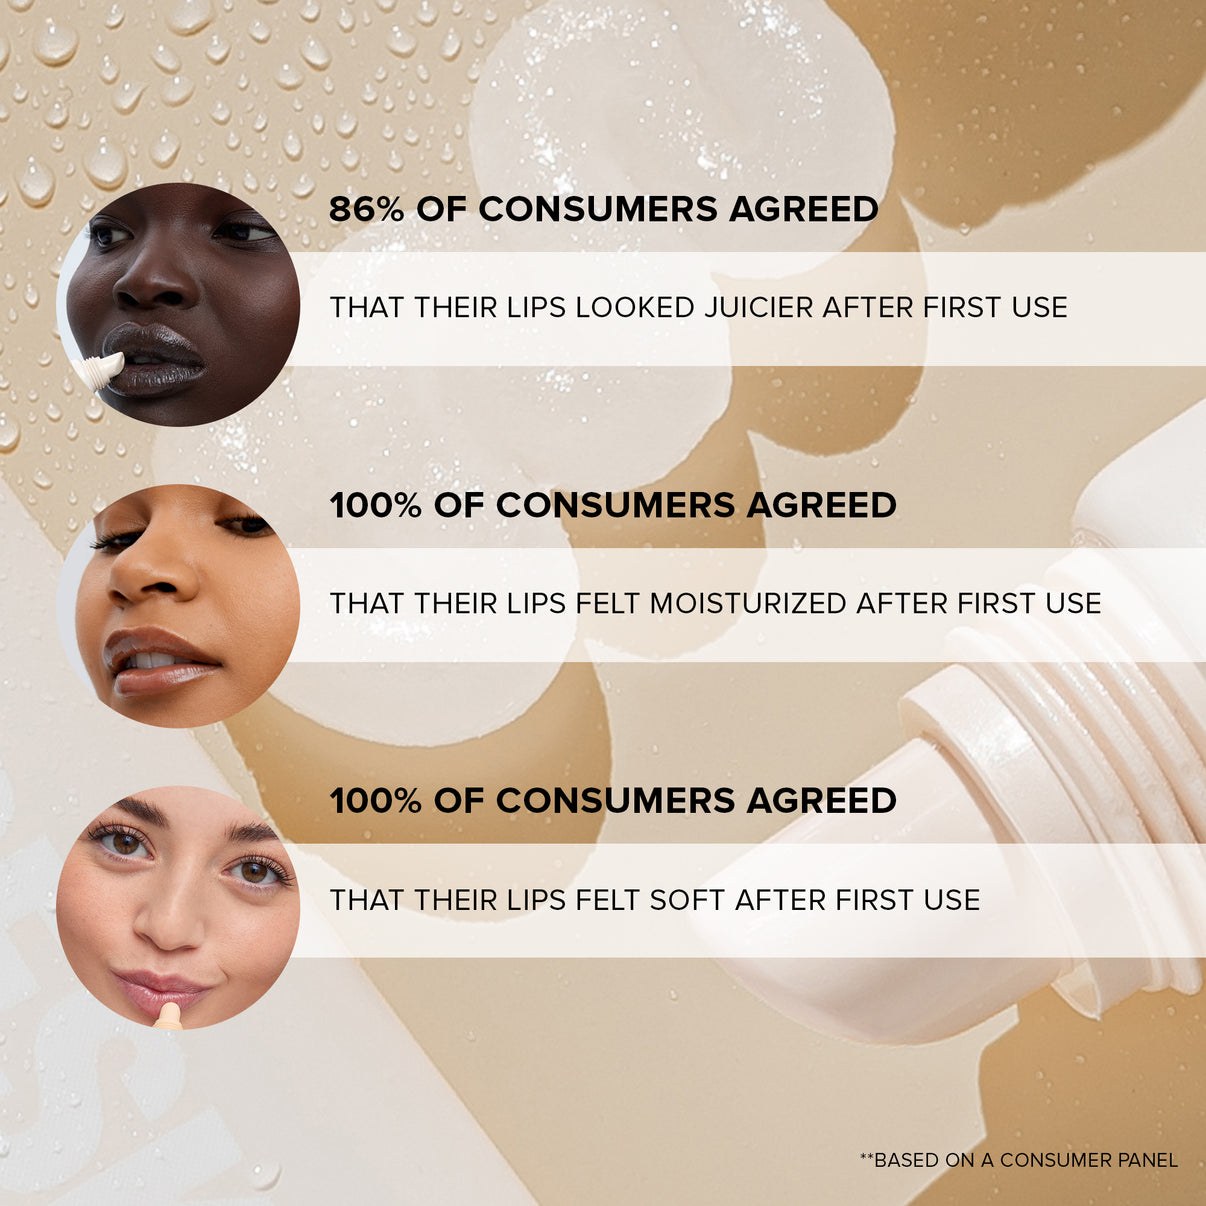 86% OF CONSUMERS AGREED THAT THEIR LIPS LOOKED JUICIER AFTER FIRST USE 100% OF CONSUMERS AGREED THAT THEIR LIPS FELT MOISTURIZED AFTER FIRST USE 100% OF CONSUMERS AGREED THAT THEIR LIPS FELT SOFT AFTER FIRST USE "*BASED ON A CONSUMER PANEL